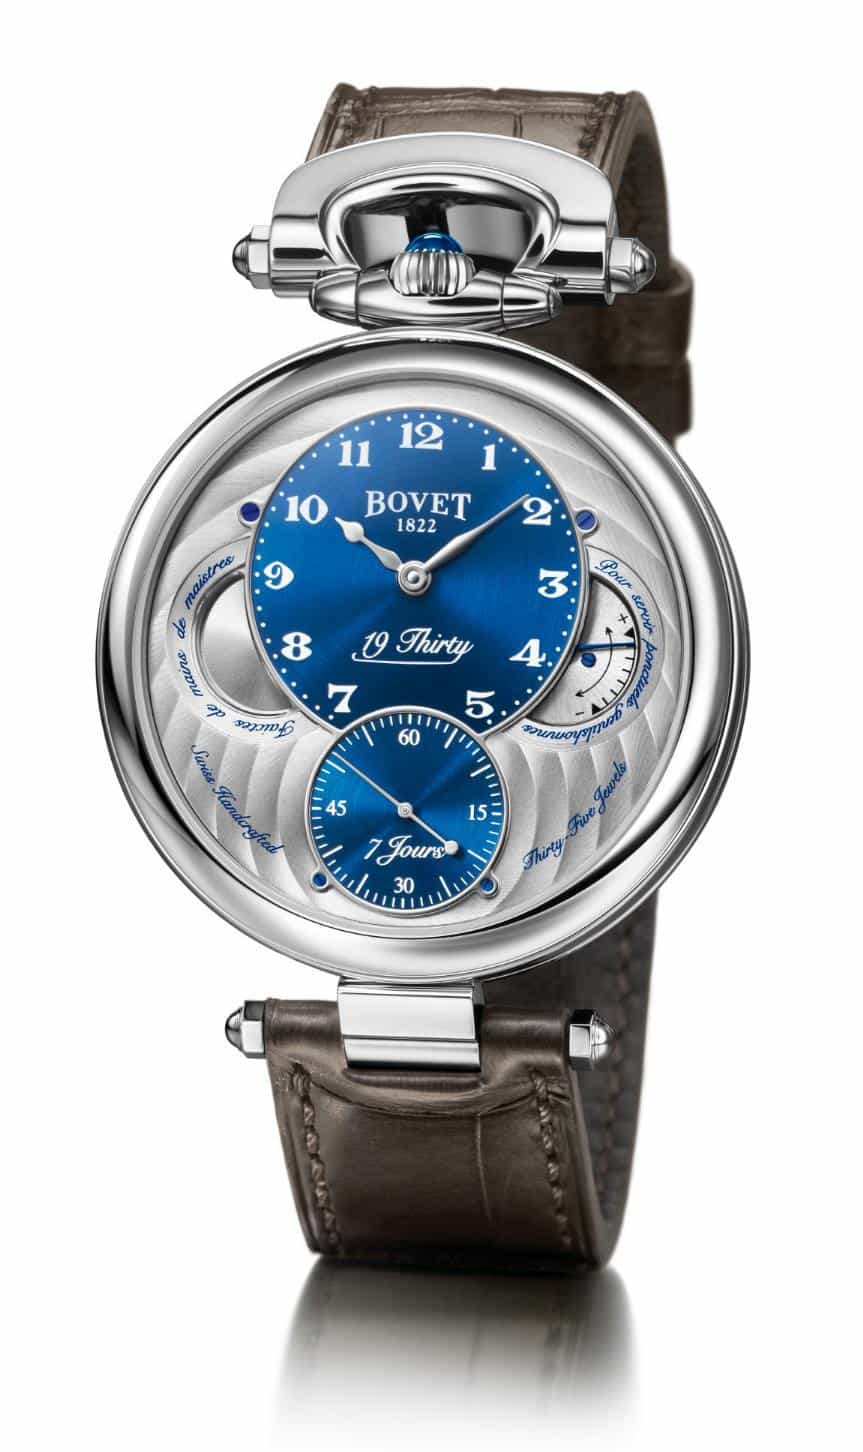 Bovet-19Thirty-Collection-5